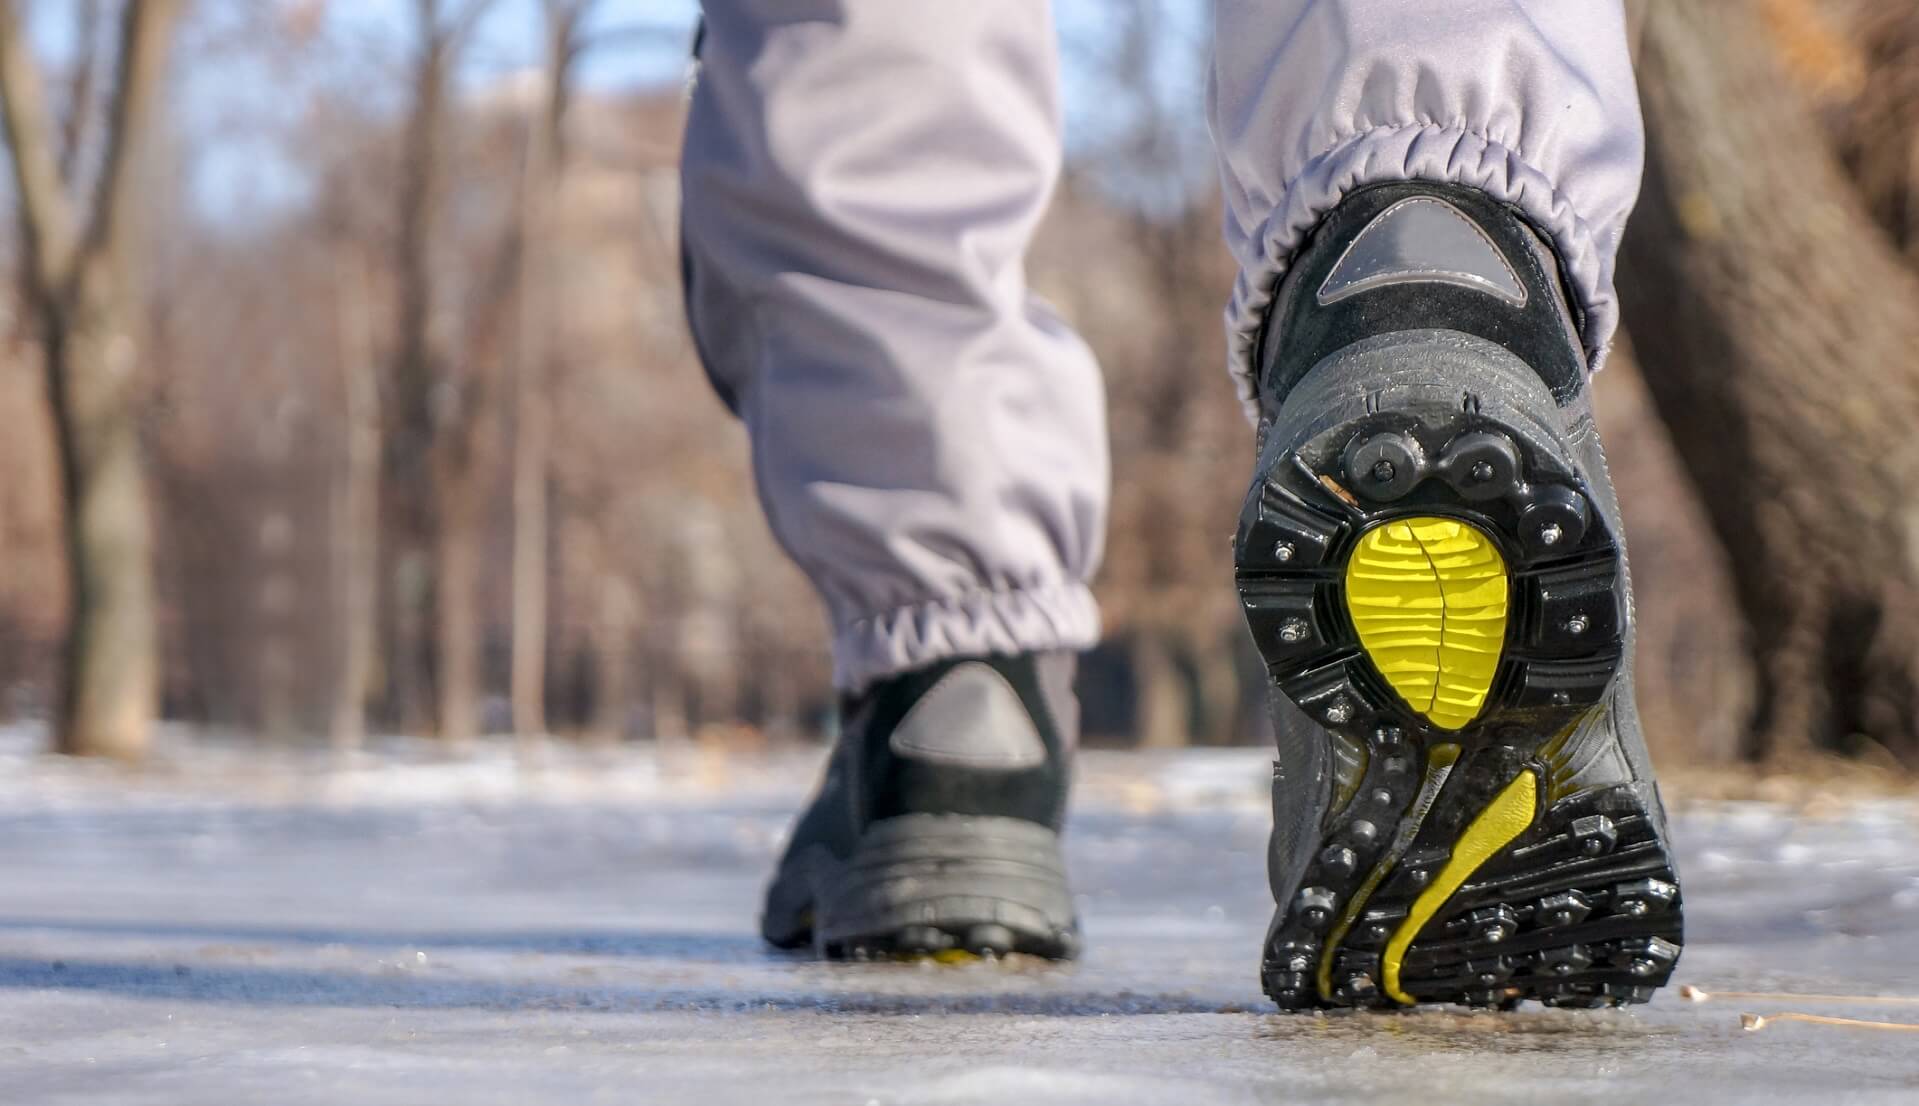 Walking on ice with caution